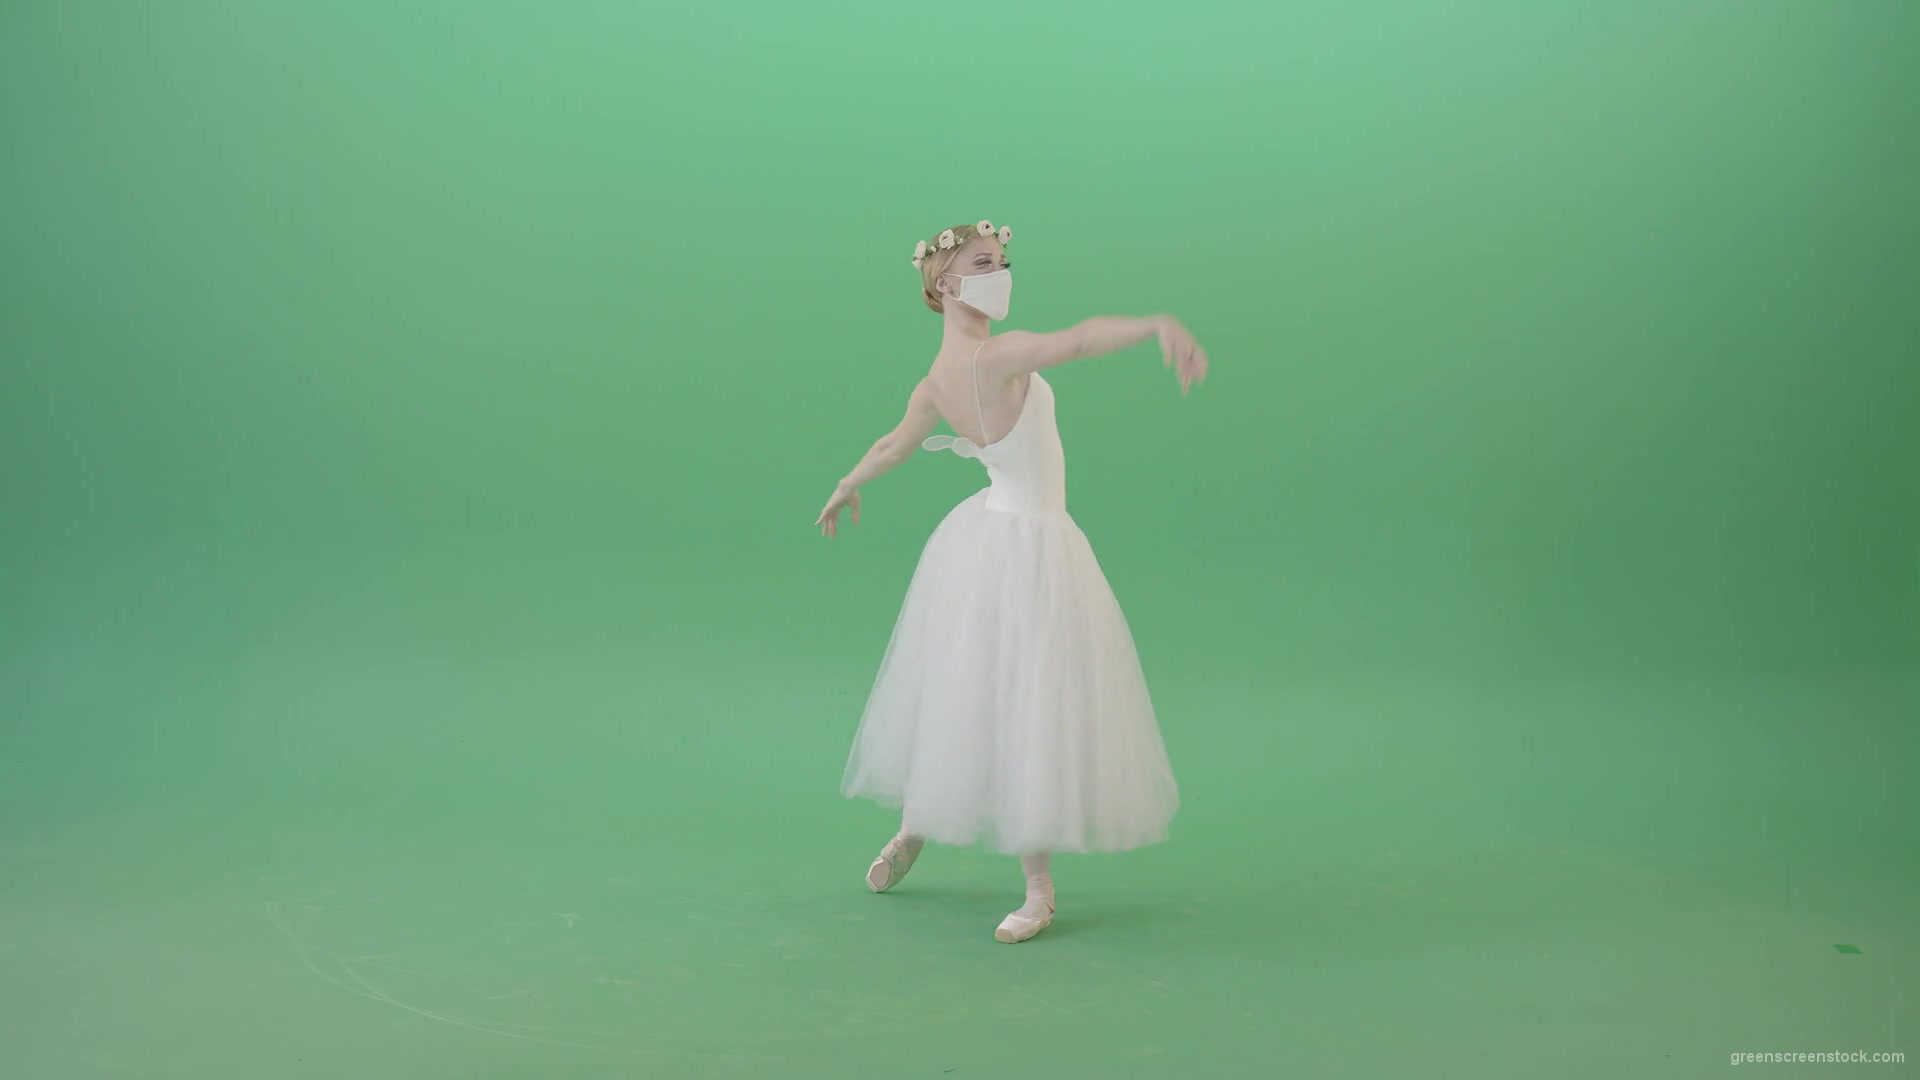 Ballet-Dance-young-woman-welcome-Corona-Virus-dancing-in-mask-isolated-on-green-screen-4K-Video-Footage-1920_008 Green Screen Stock